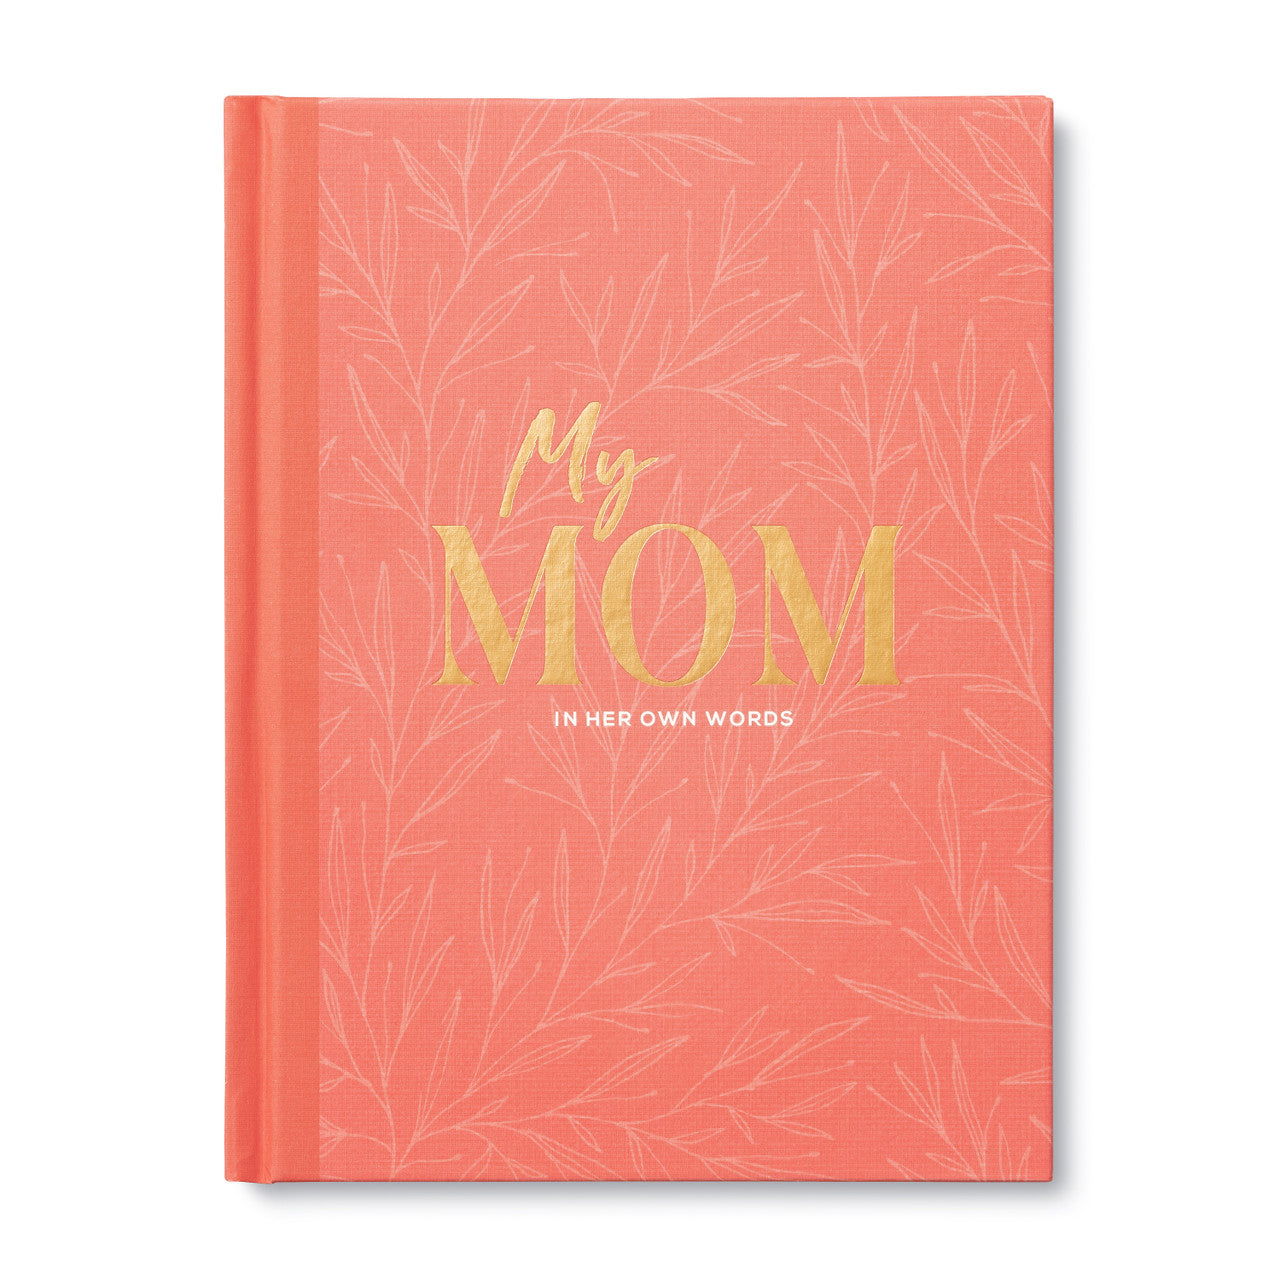 MY MOM- An Interview Journal to Capture Reflections in Her Own Words